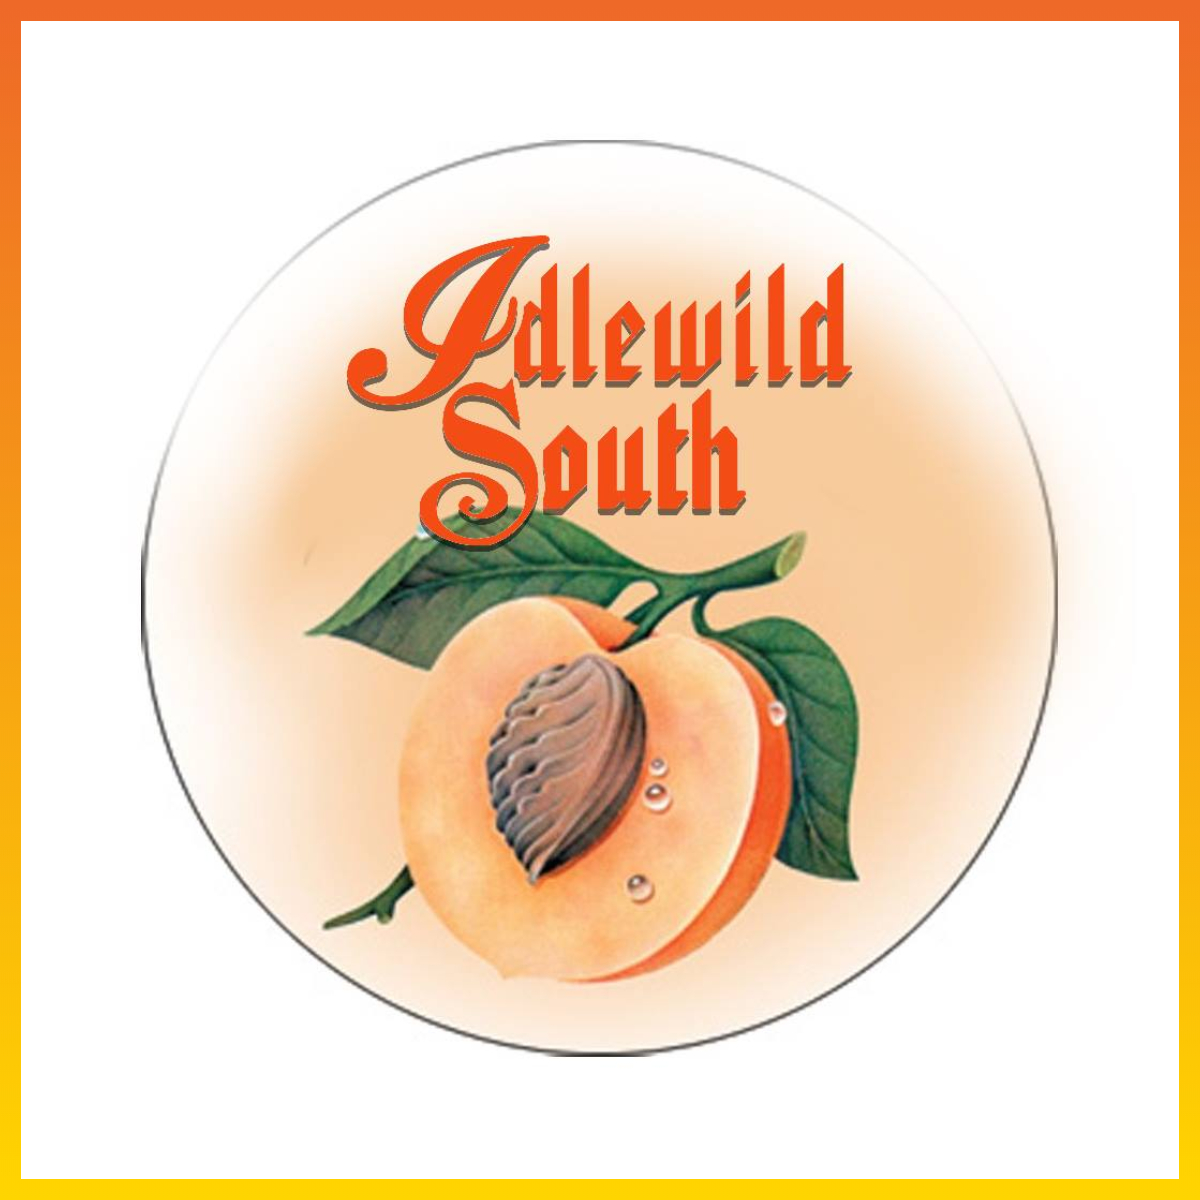 Buy Tickets to Idlewild South - A Tribute to The Allman Brothers Band ...